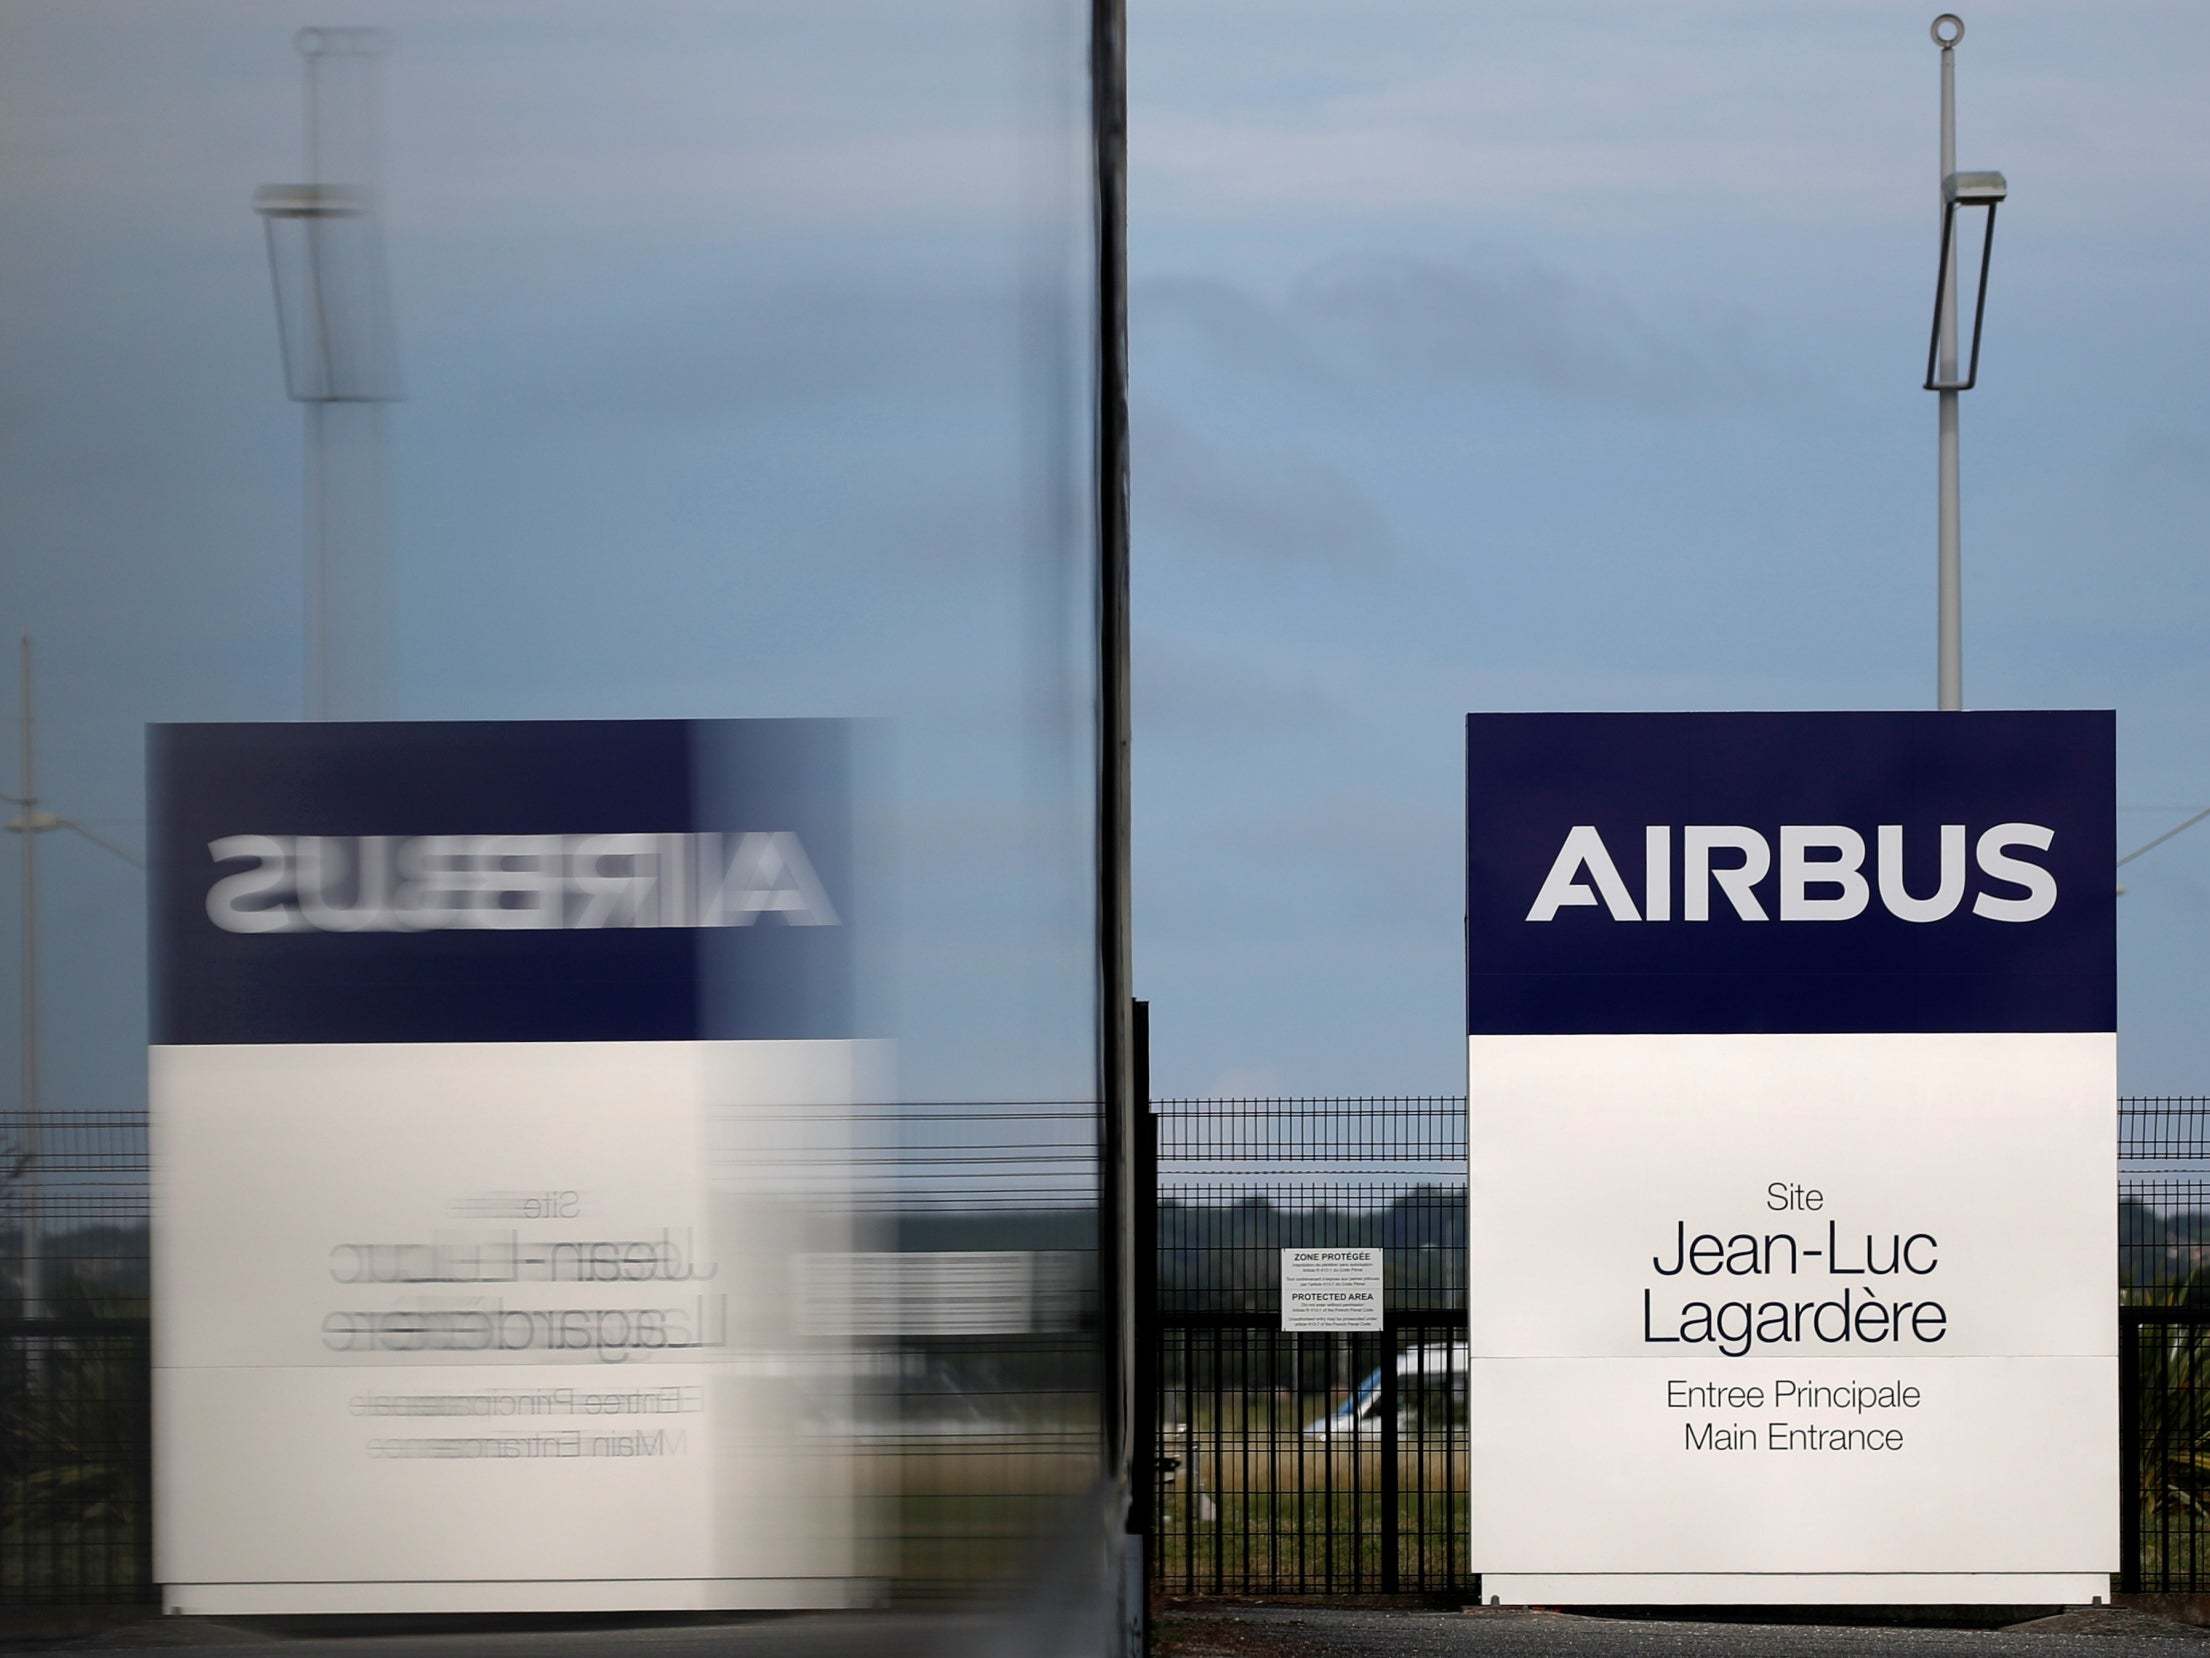 The WTO ruled the EU has failed to withdraw billions of dollars in illegal subsidies to Airbus